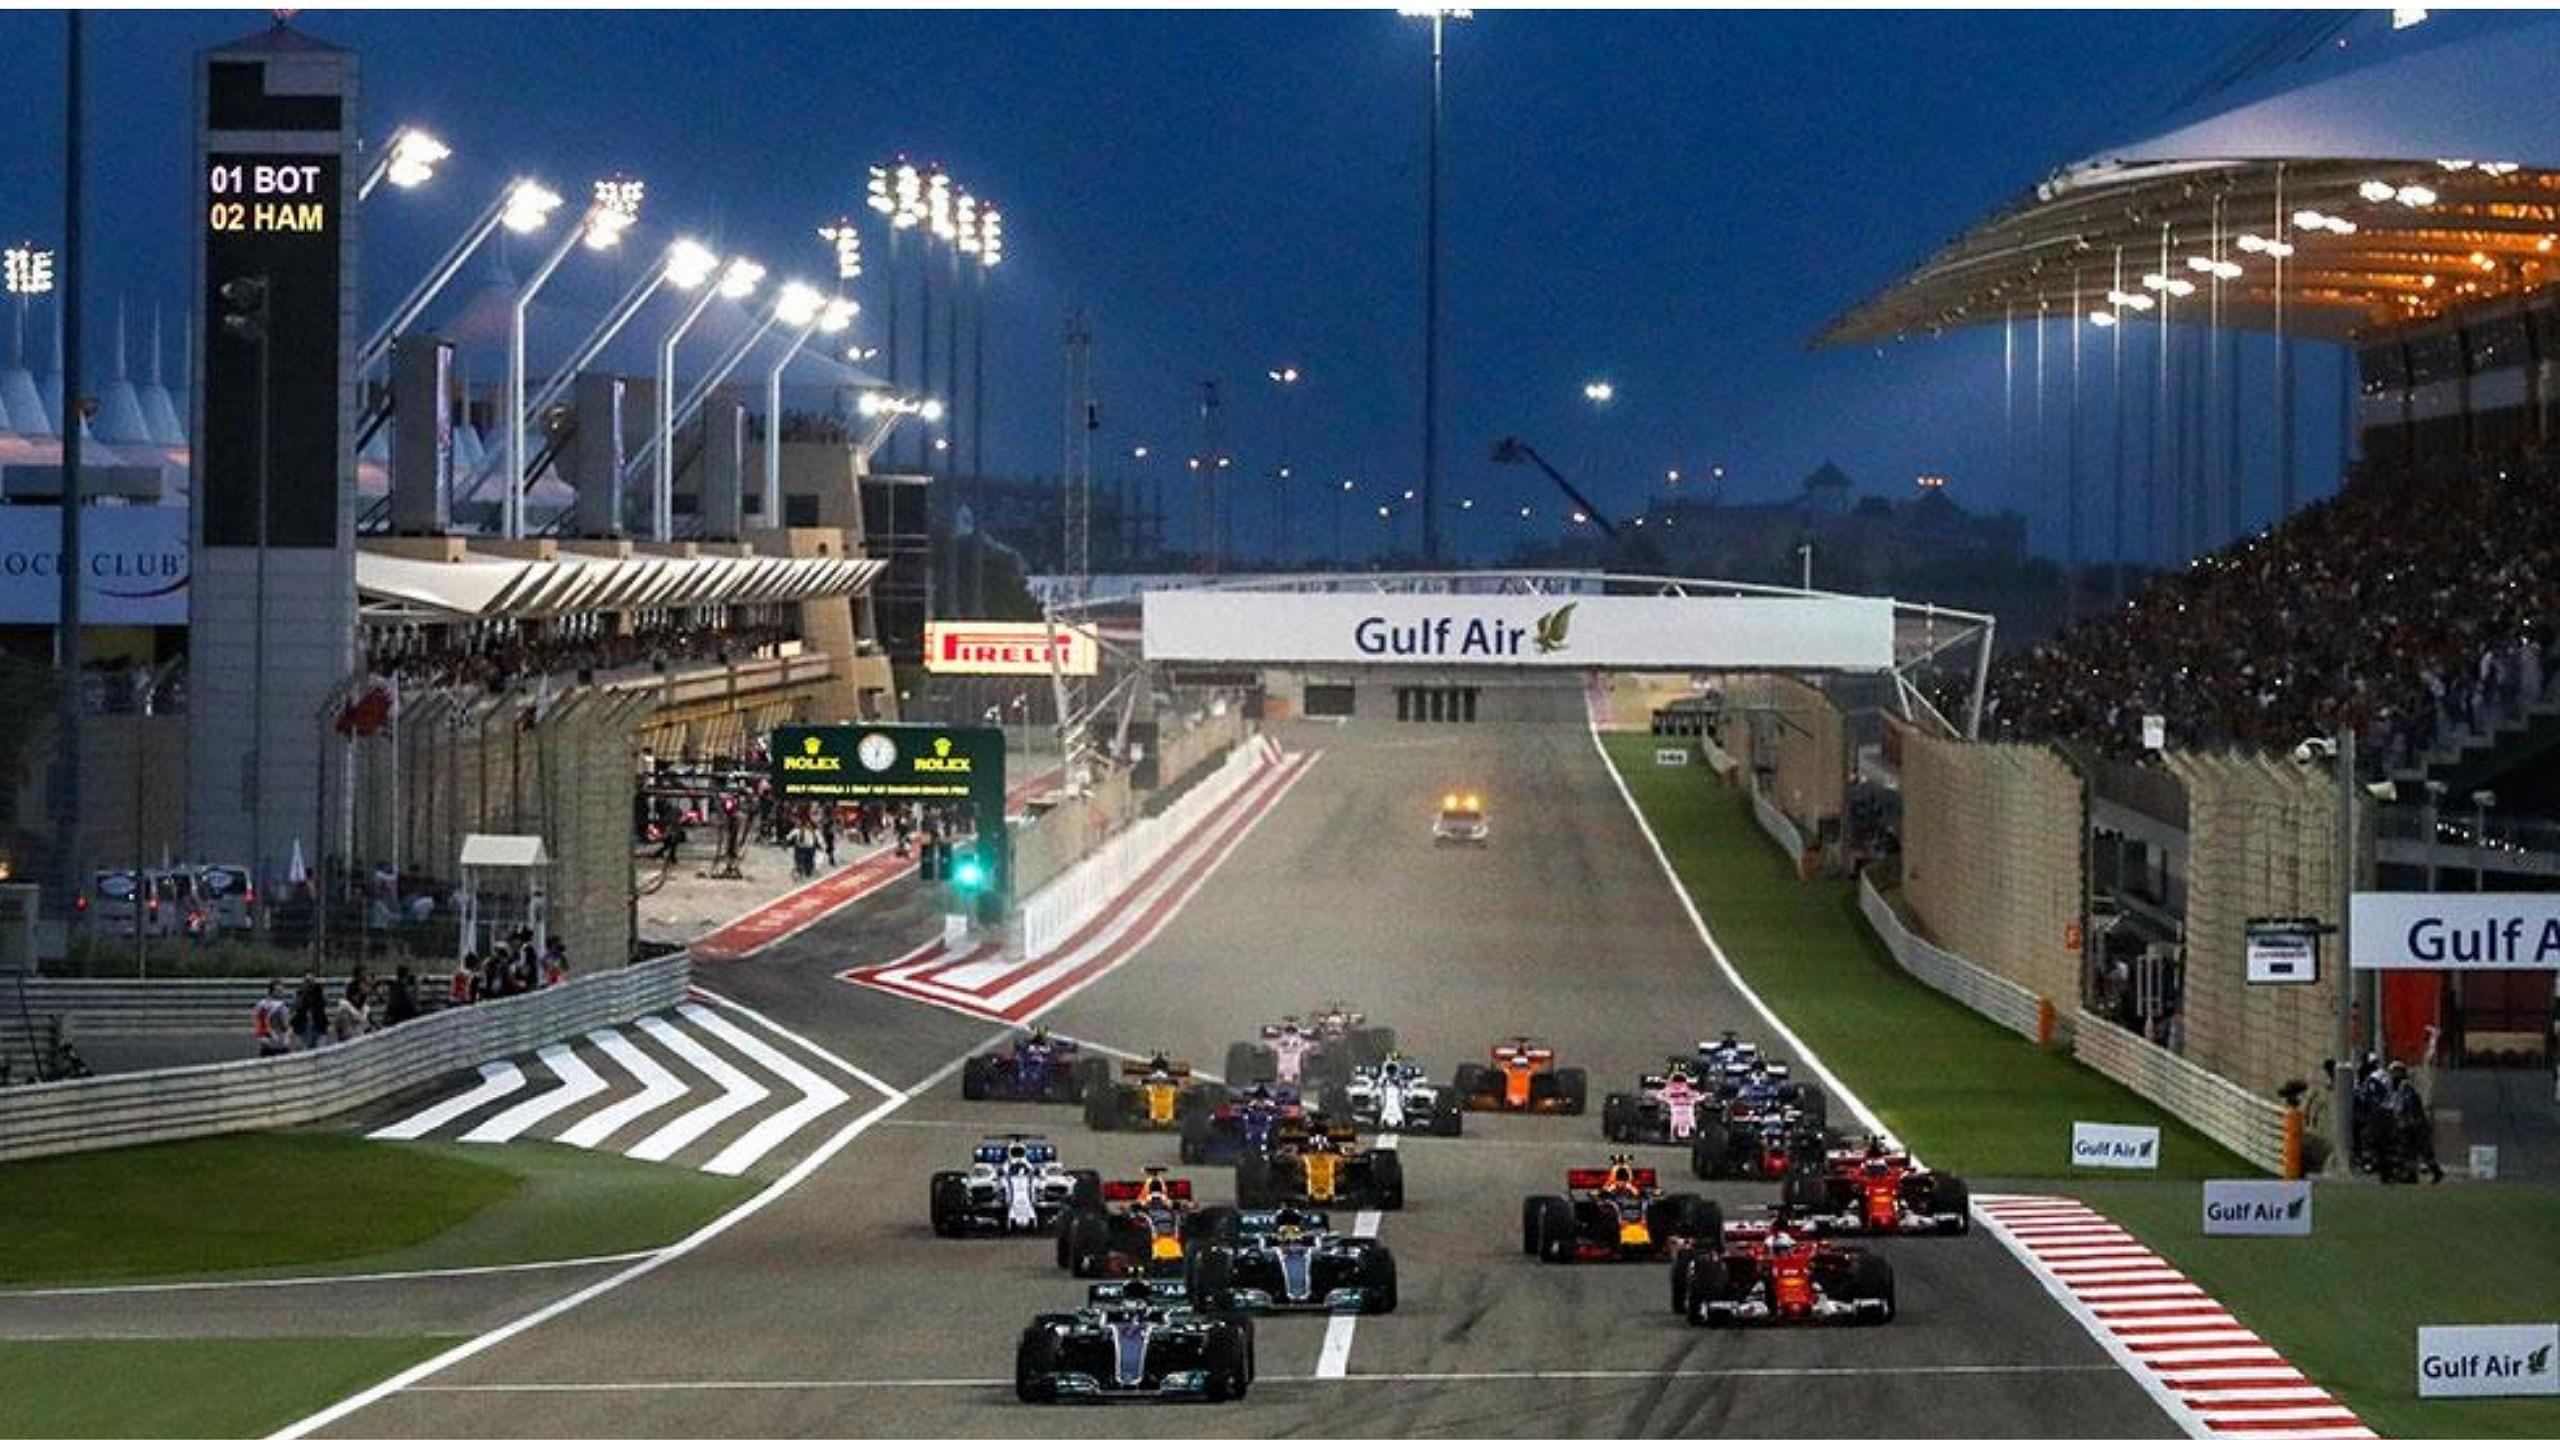 F1 Live Stream Bahrain GP 2020, Start Time & Broadcast Channel: When and Where to watch F1 Free Practice, Qualifying and Race held at Sakhir?